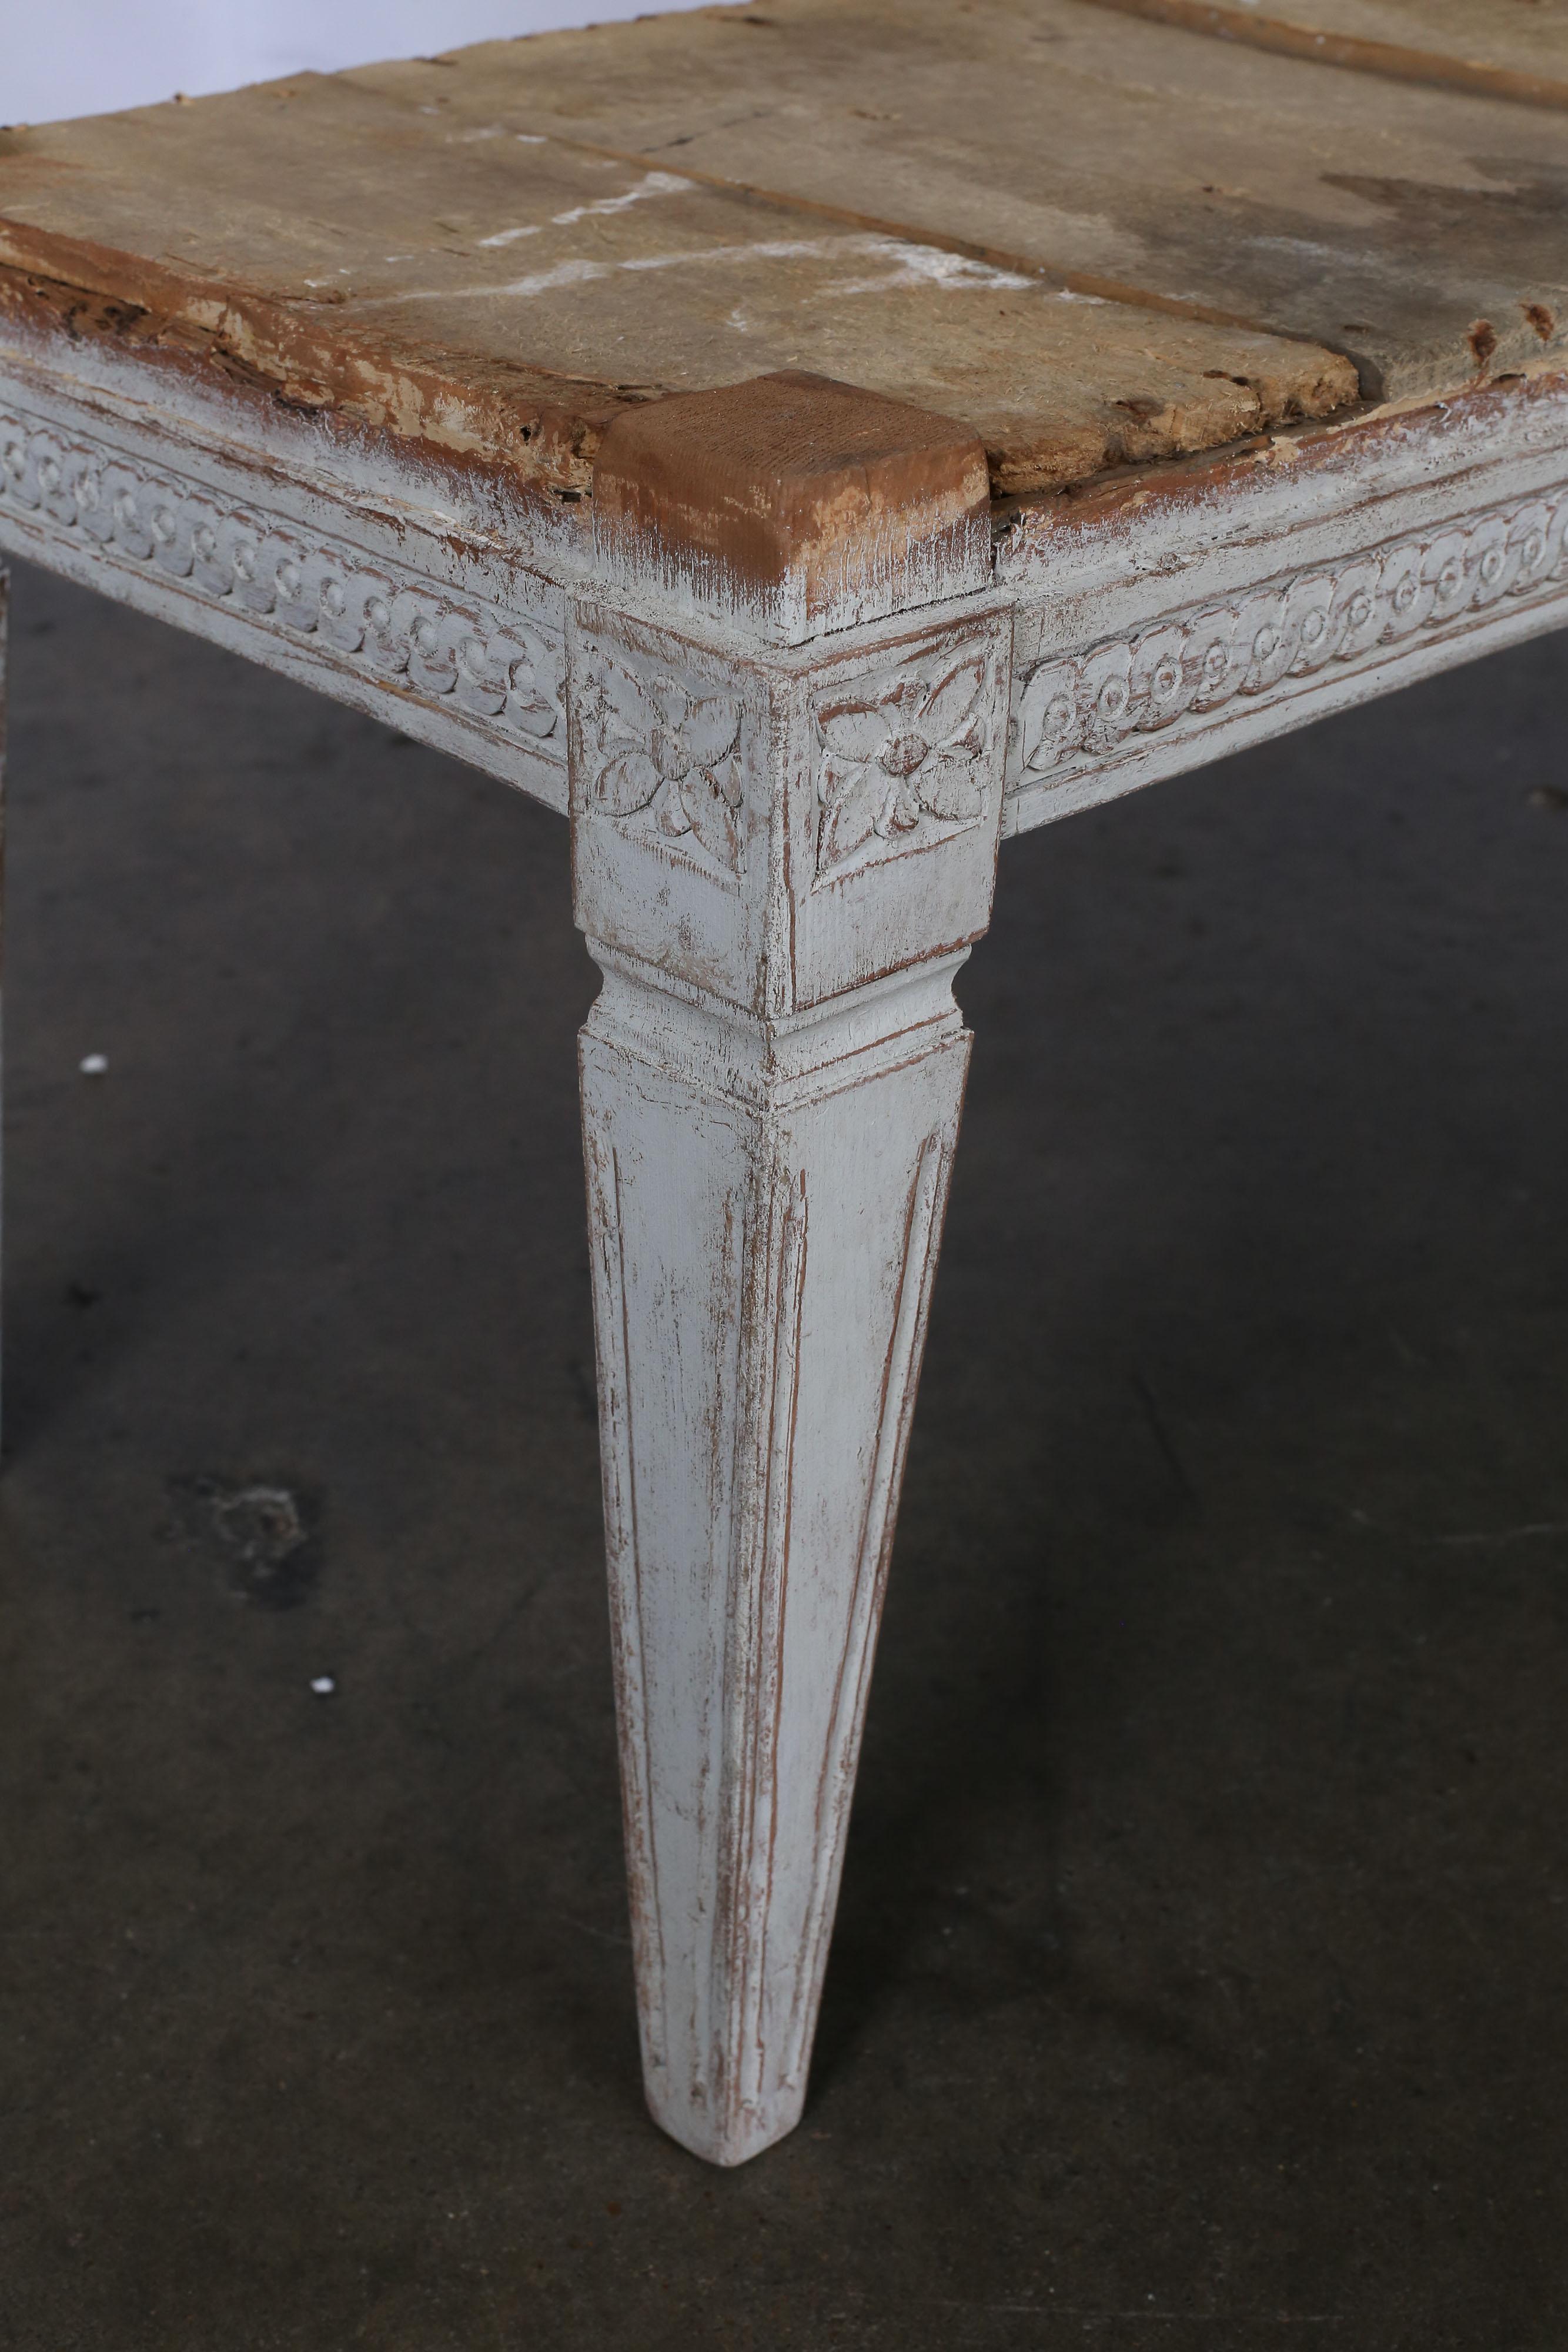 19th century Swedish Gustavian bench with carving around all sides and tapered square legs.